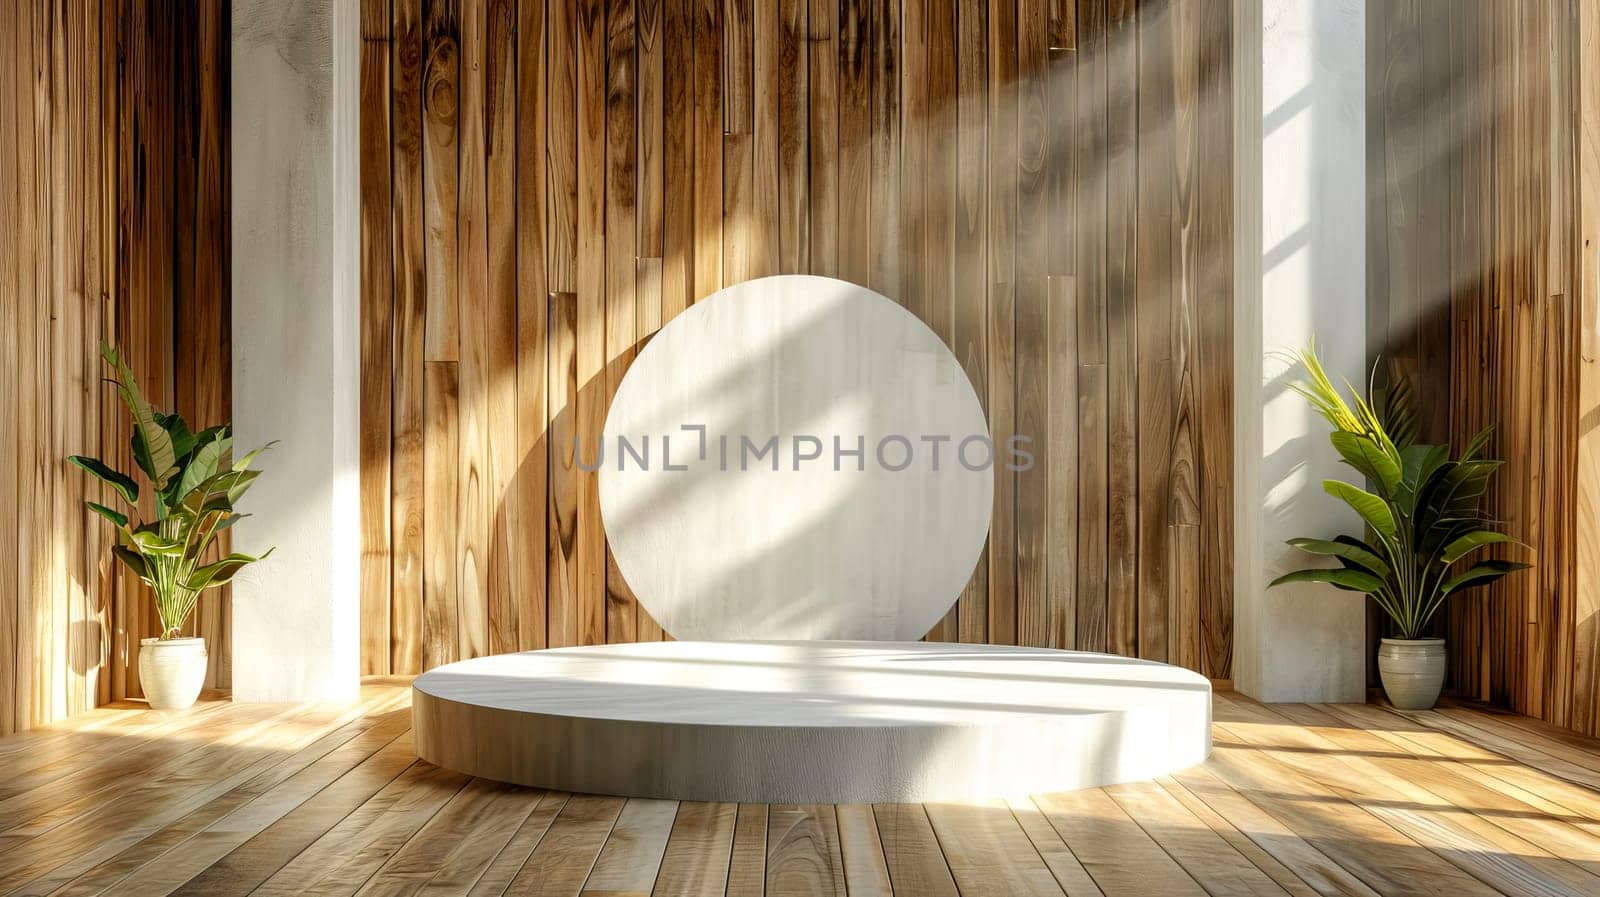 Natural wood grain panels combined with a white cylindrical podium. by OlgaGubskaya